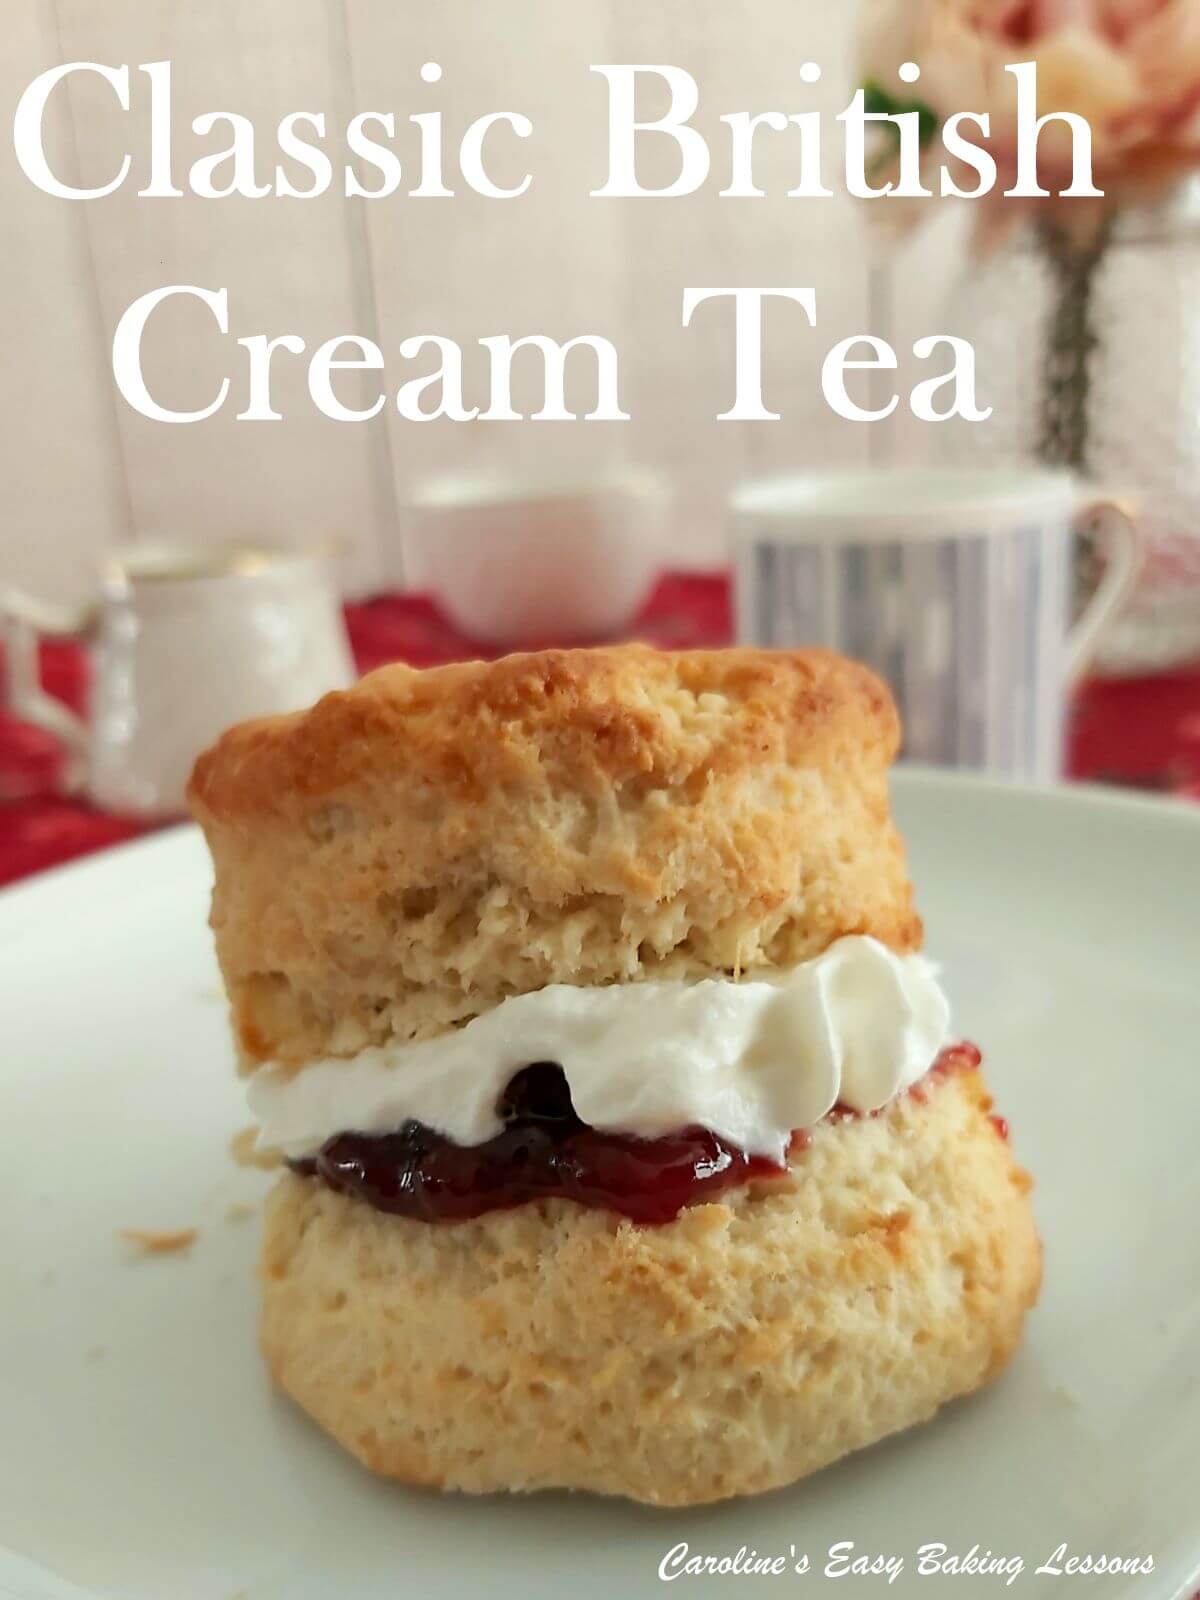 British scone with a big rise, split in half with jam and cream and tea cup behind and cream tea title.